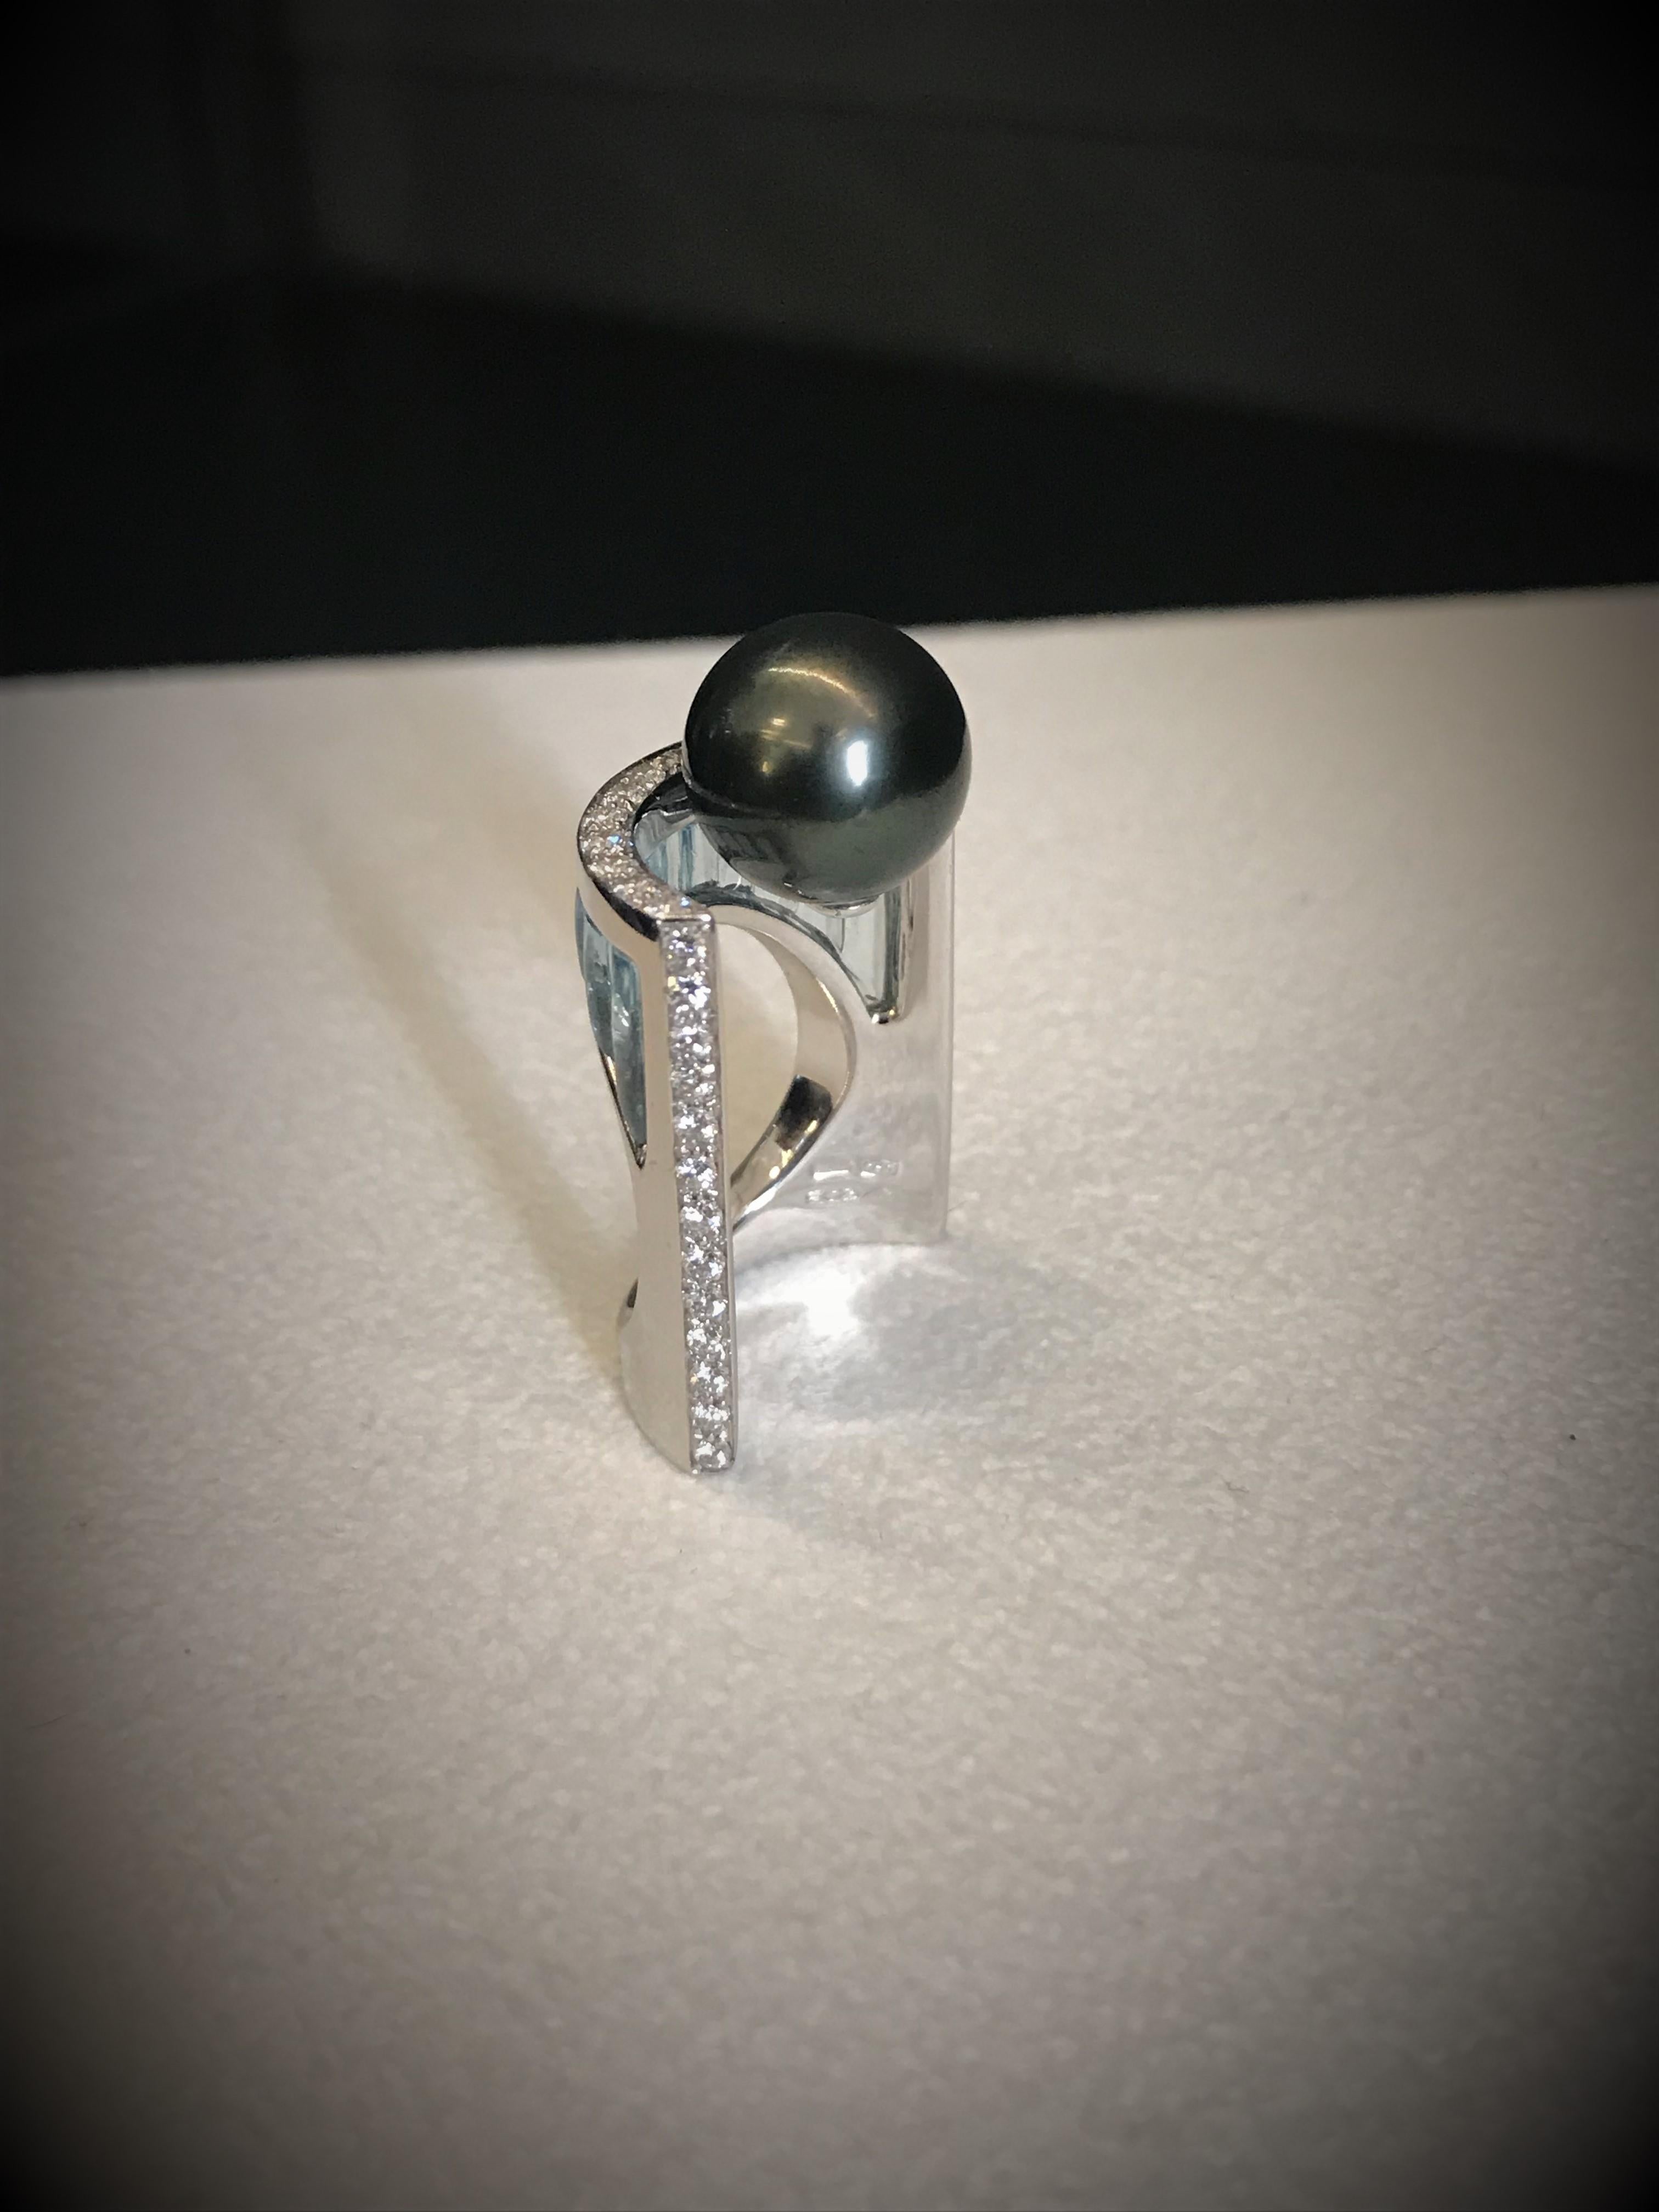 White gold shapes exalted by transparent inlay form an arch that sustain a stunning Tahitian pearl.

White gold, diamonds pavé,  Tahiti black pearl and blue topaz inlay. 

Diamonds ct 0.62
Topaz ct 5.00
Tahiti Pearl ct 12.25
Ring size: EU 13